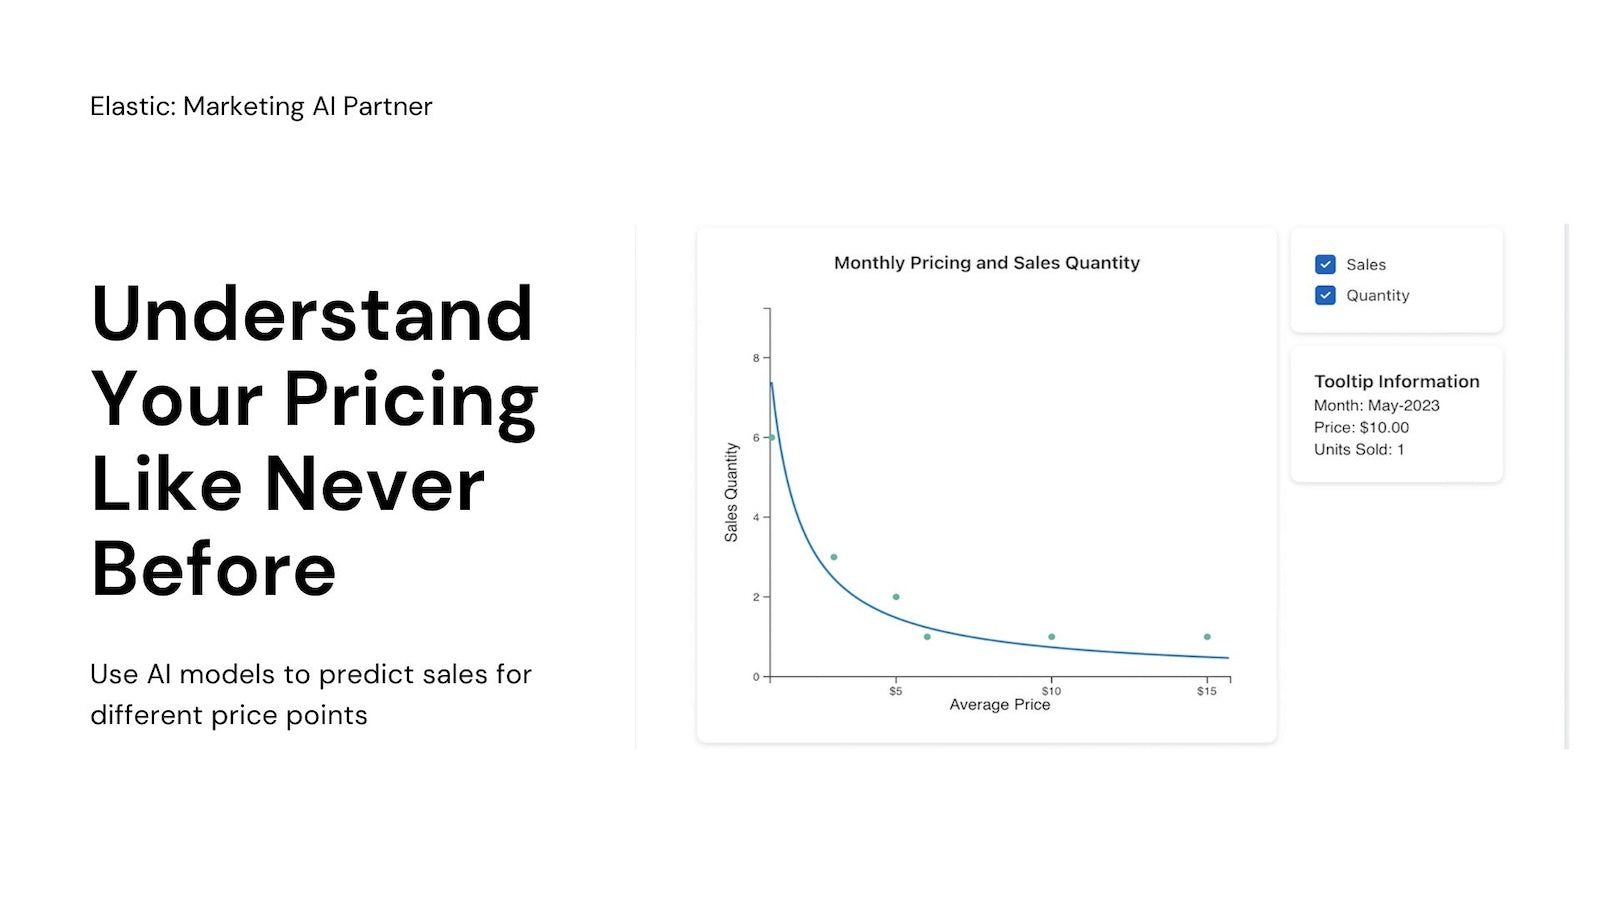 Understand Your Pricing Like Never Before